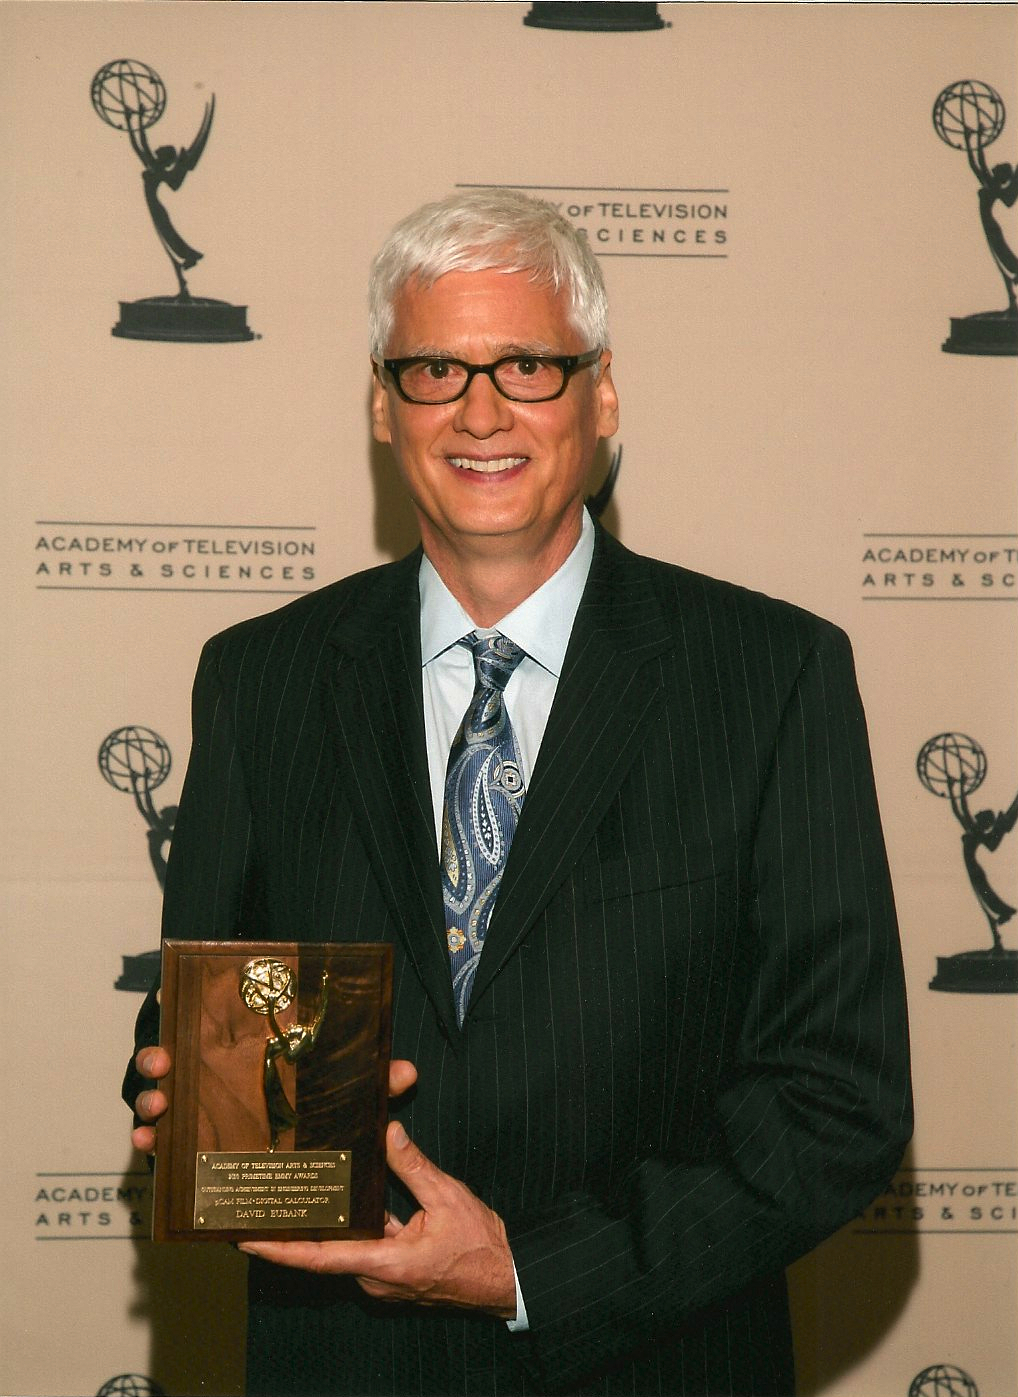 62nd Primetime Emmy Awards, 2010. Won an Engineering Plaque for Outstanding Achievement in Engineering Development from the Academy of Television Arts & Sciences.